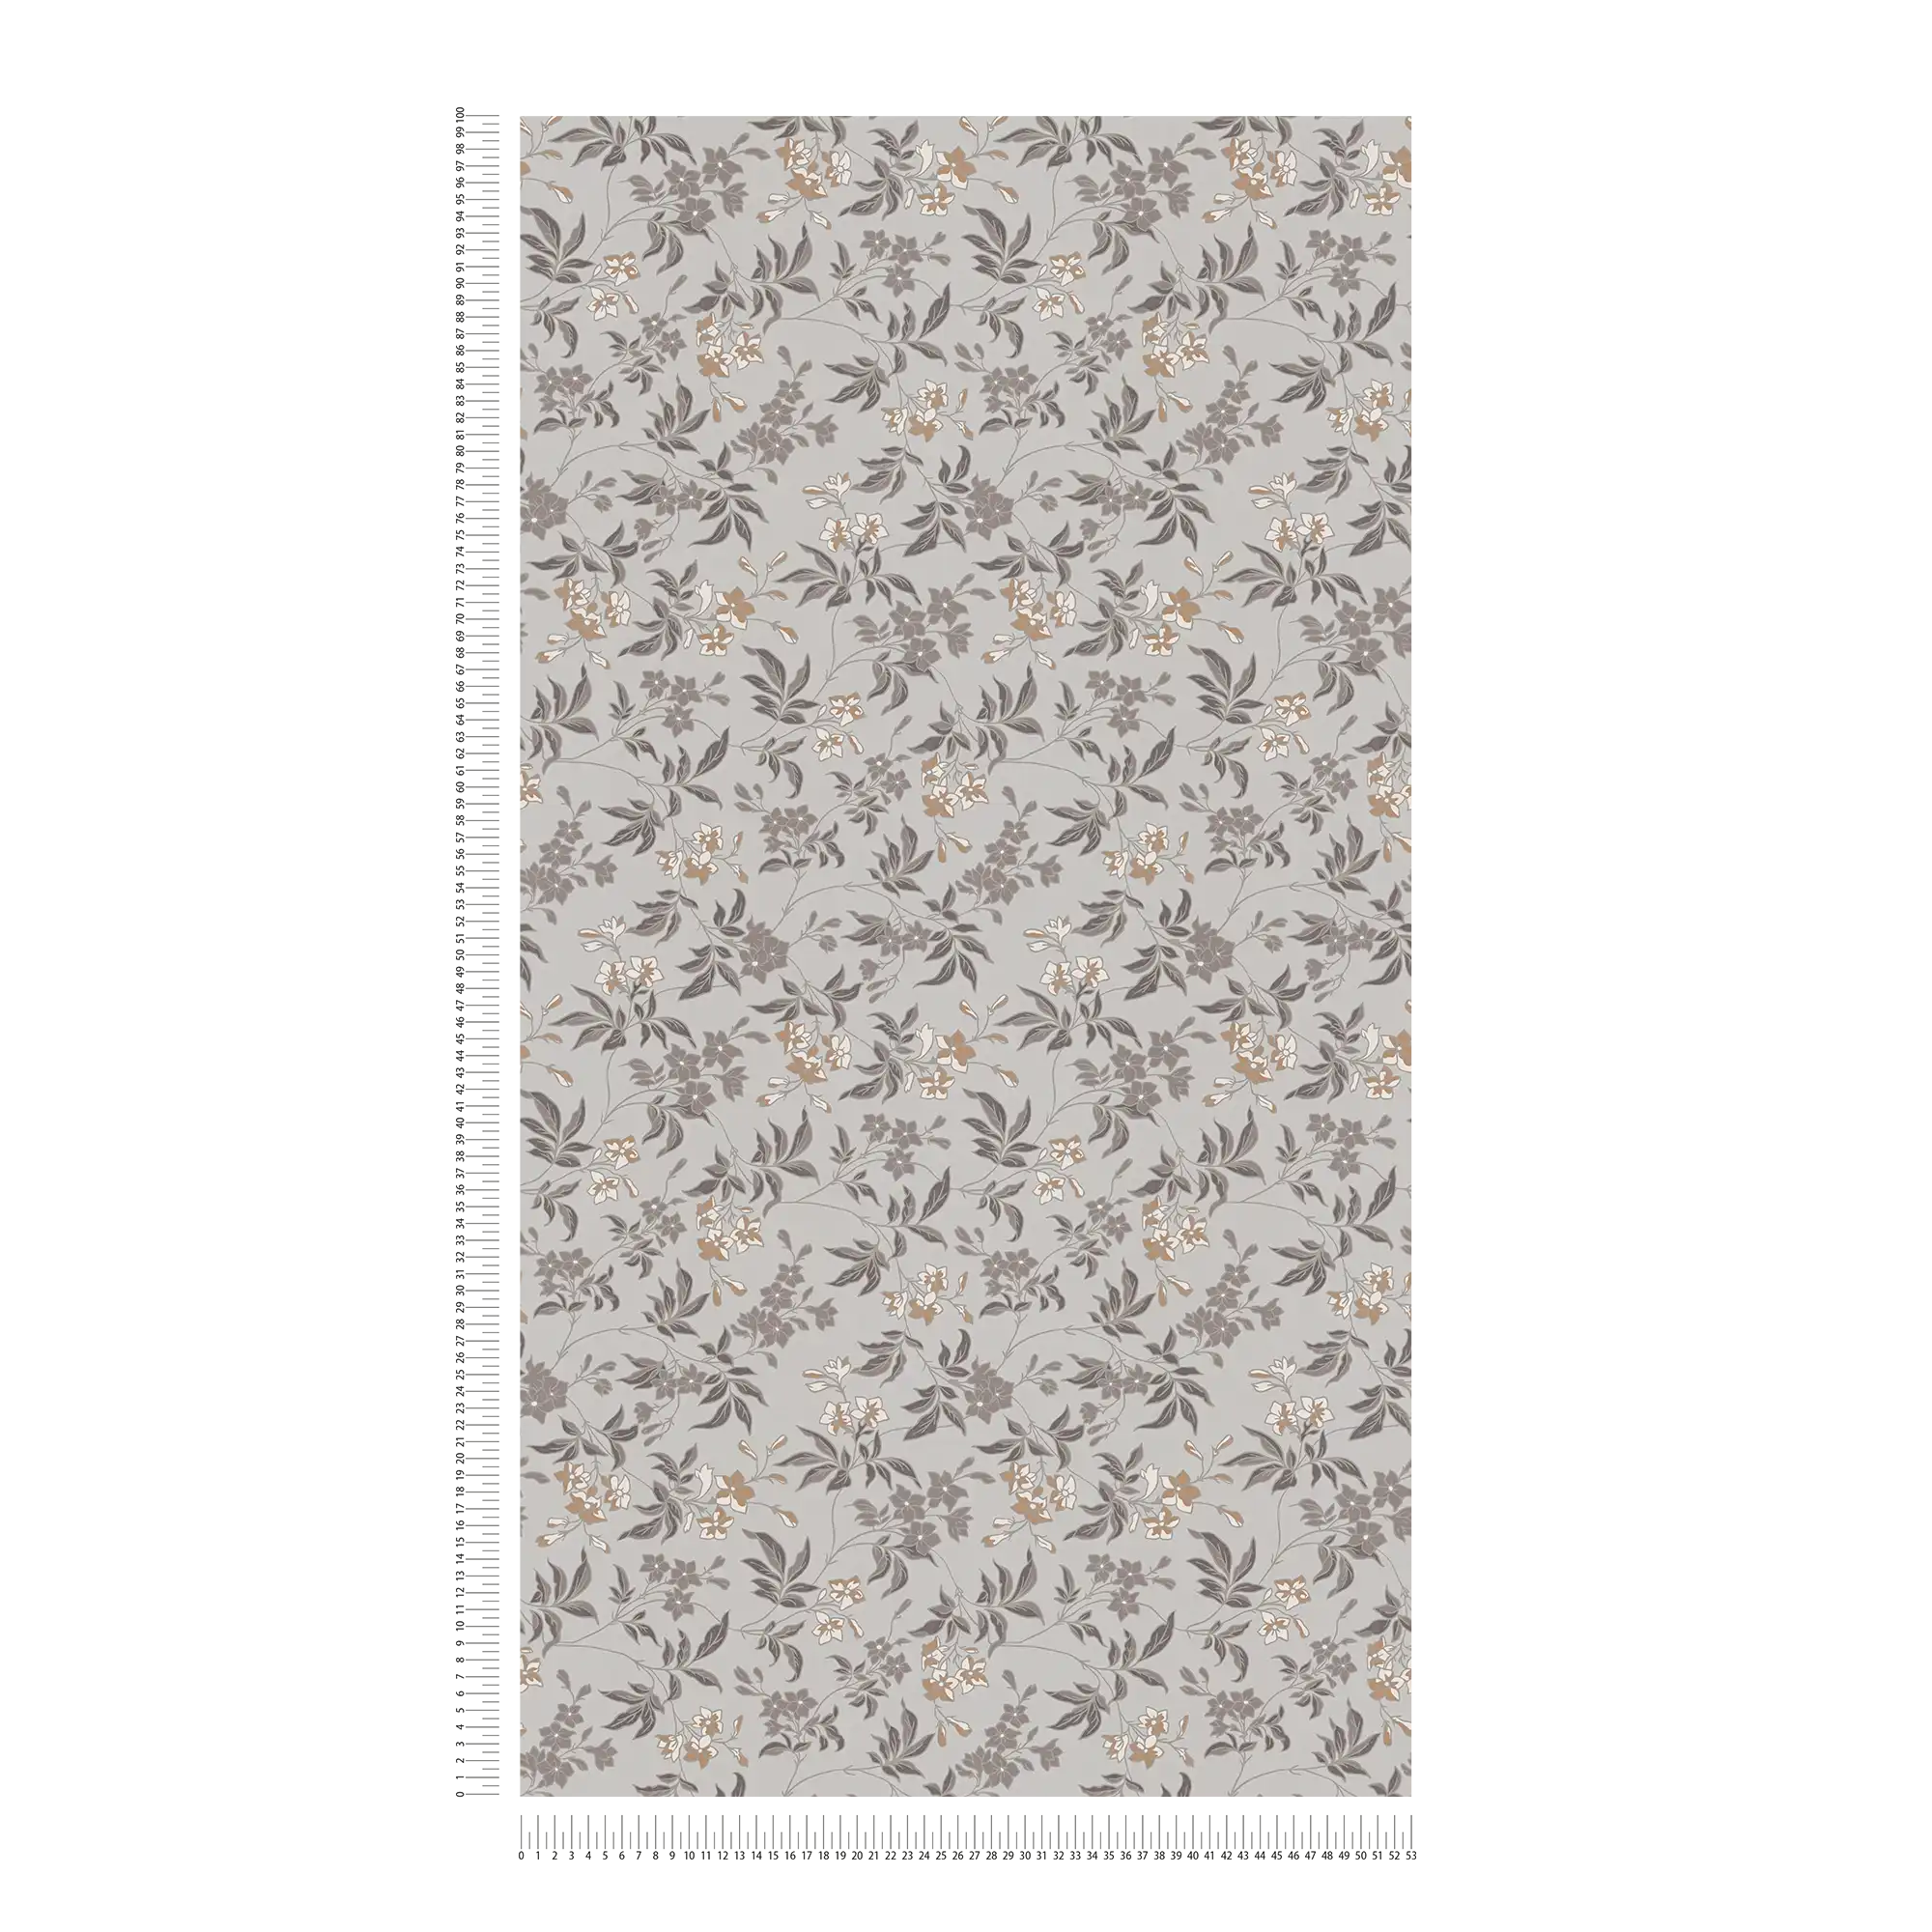             Floral pattern flowers and vines wallpaper - grey, brown, white
        